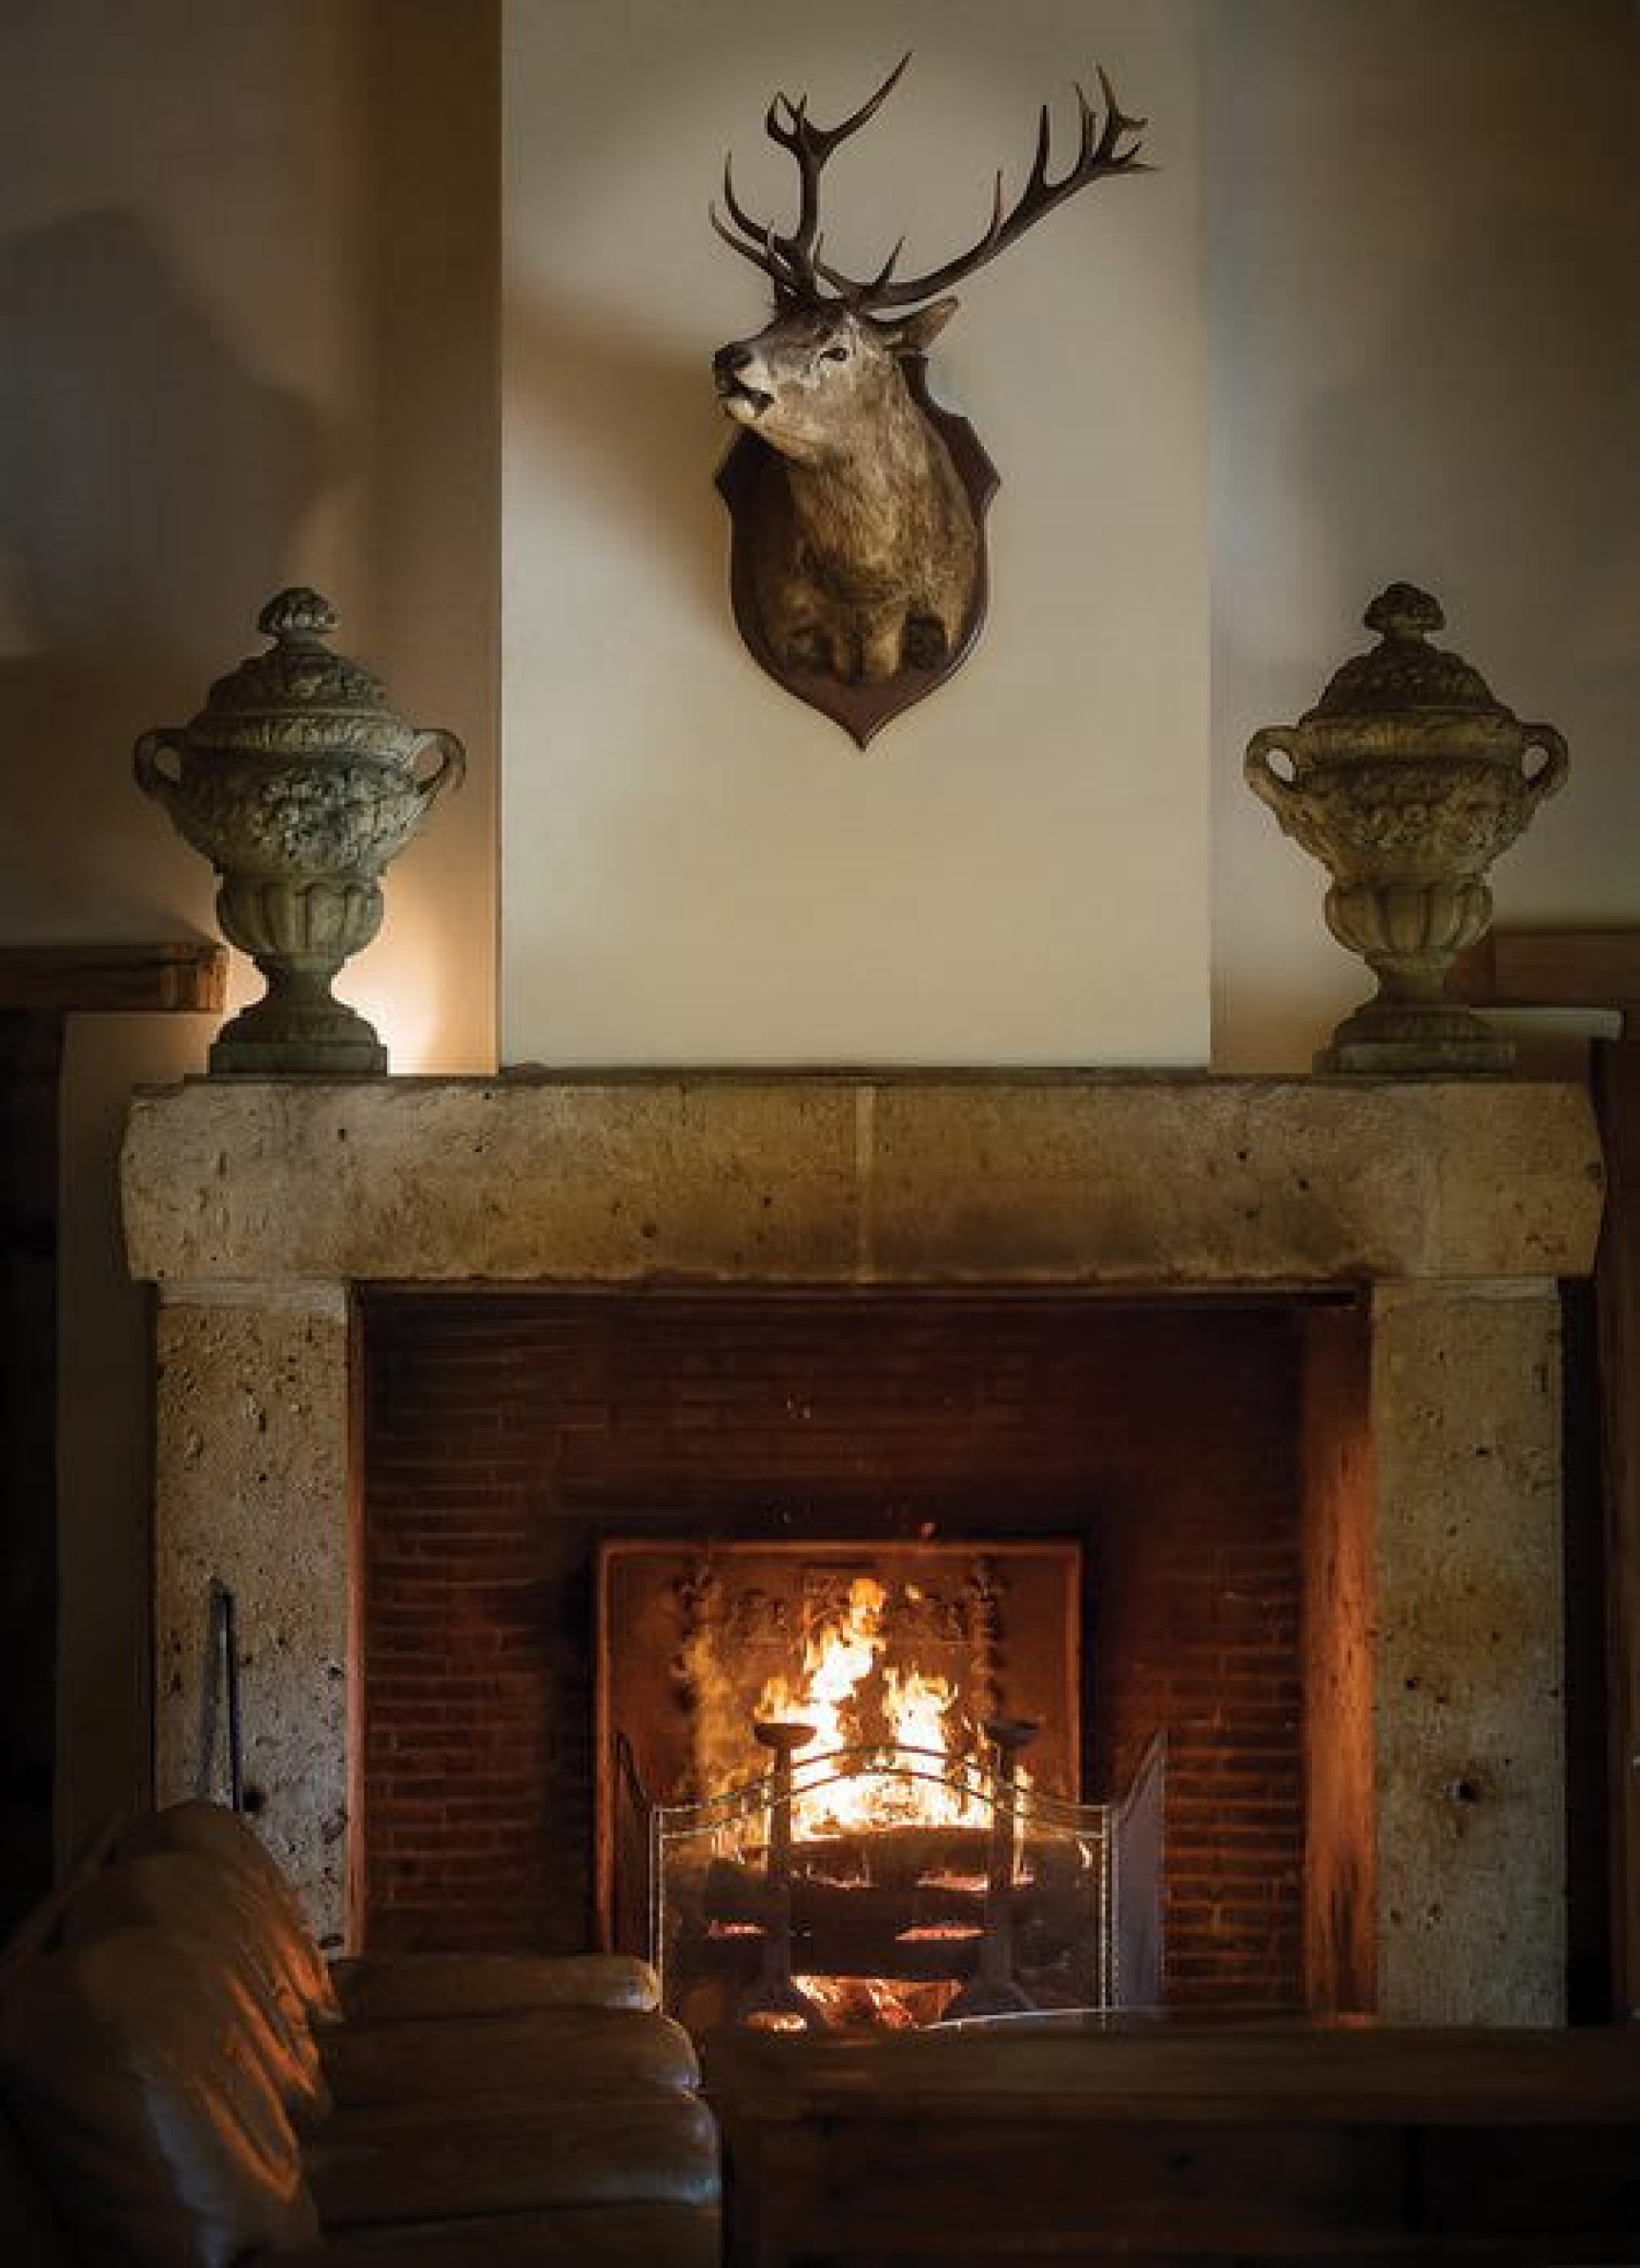 Les Bordes fireplace with stag head